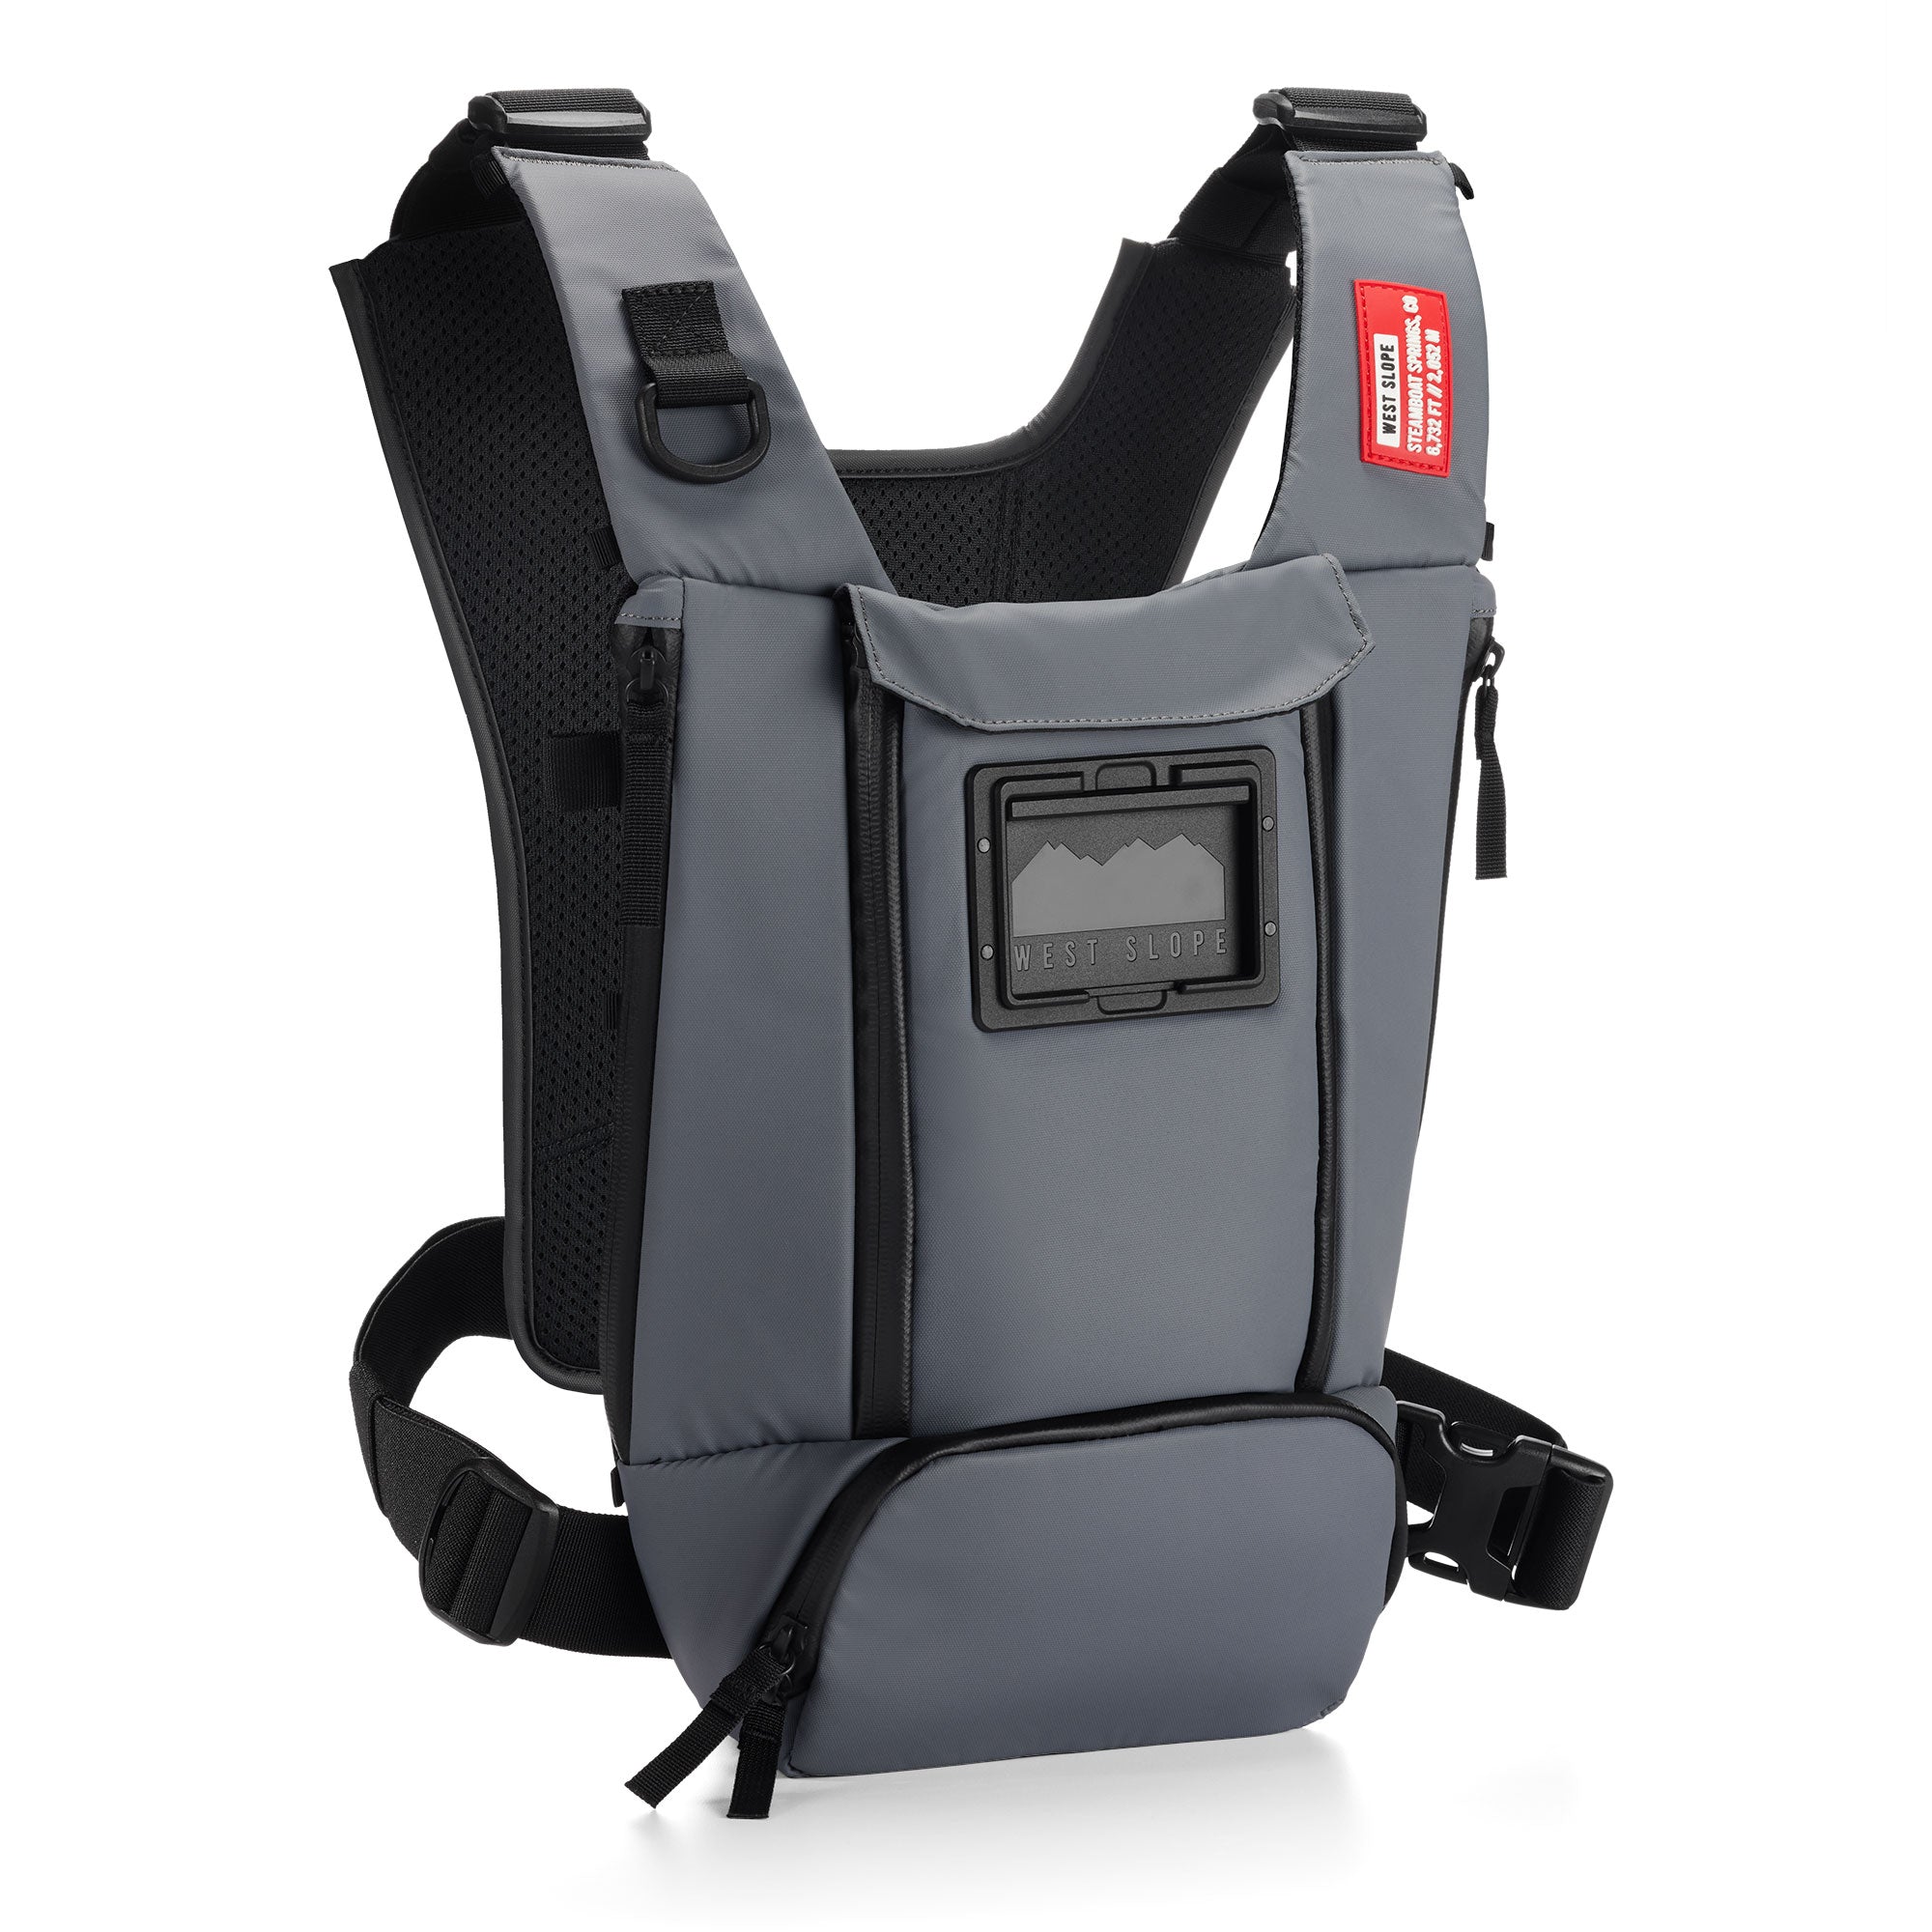 PRO-180X Chest Pack – West Slope